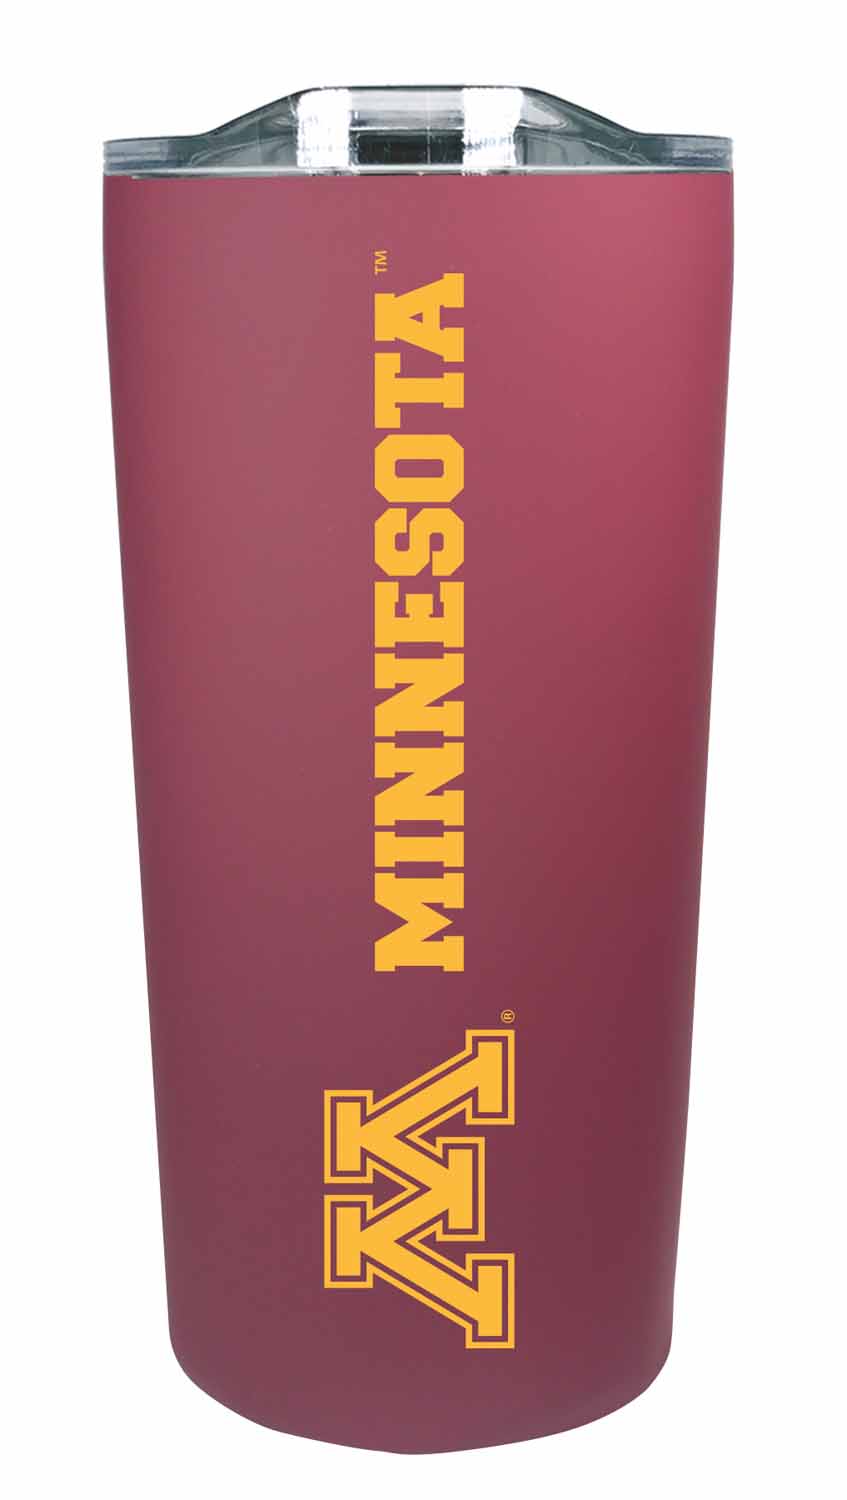 Minnesota Golden Gophers NCAA Stainless Steel Tumbler perfect for Gameday - Maroon